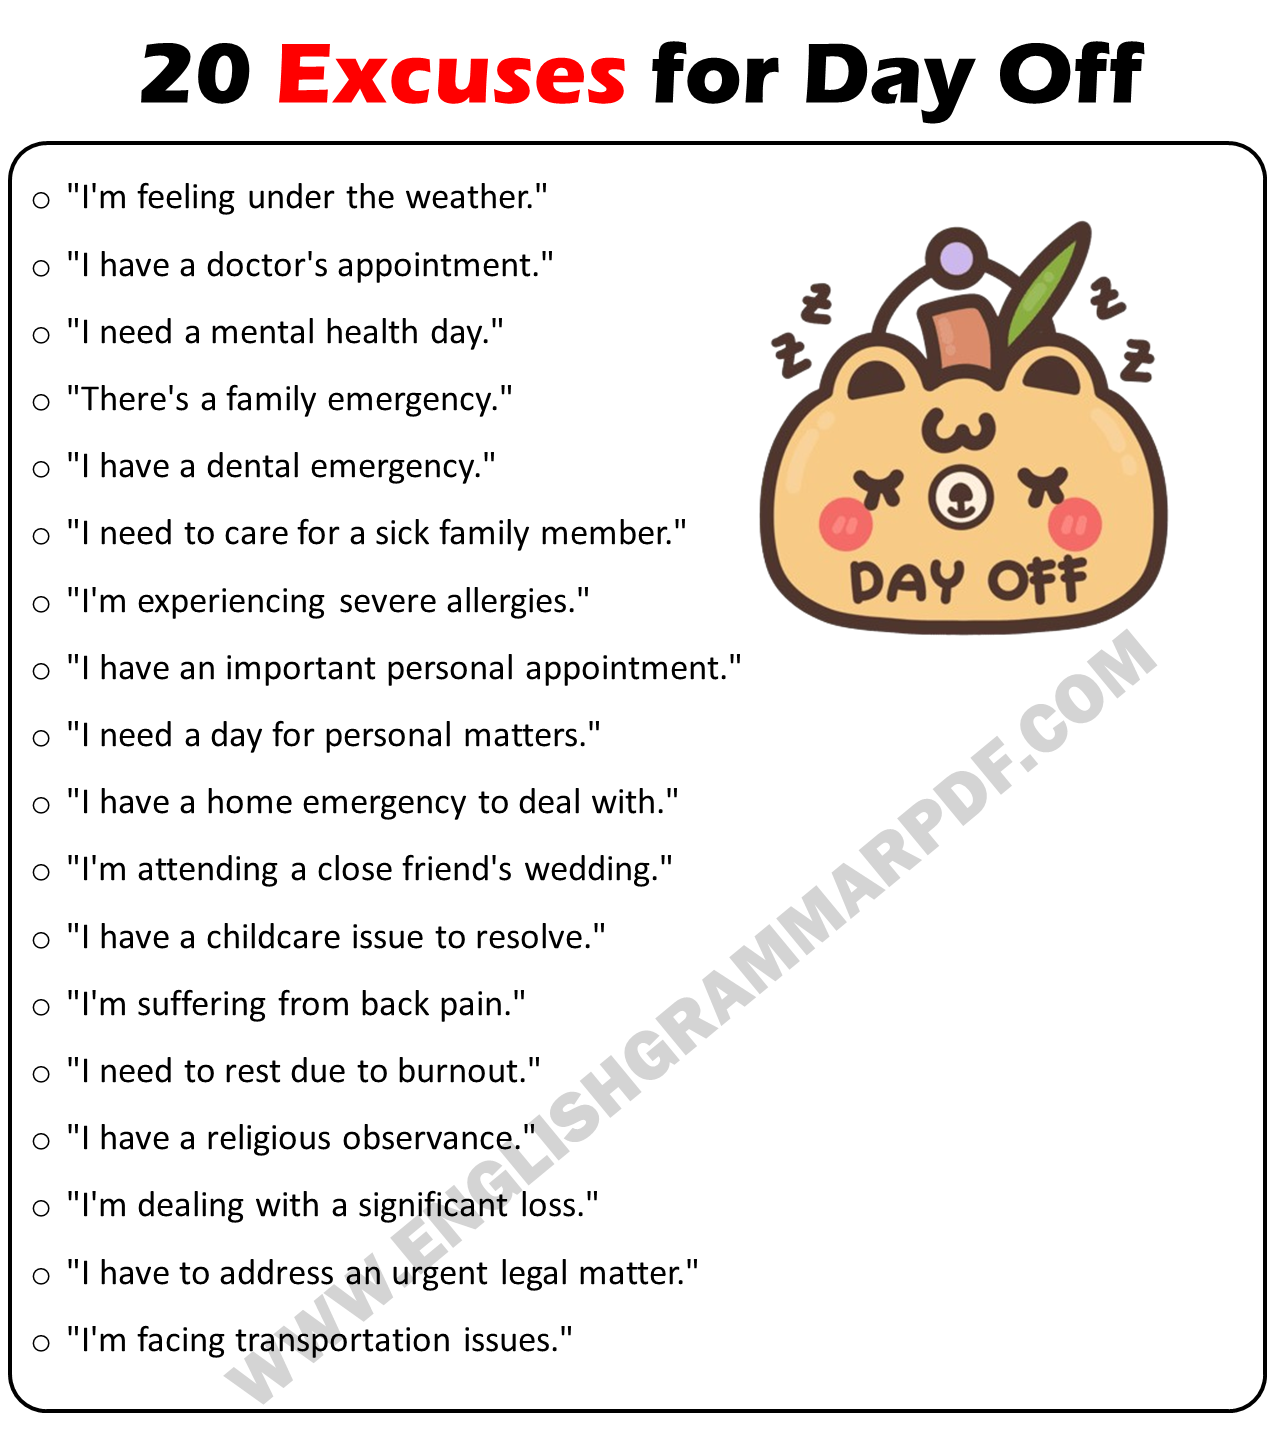 20 Excuses for Day Off